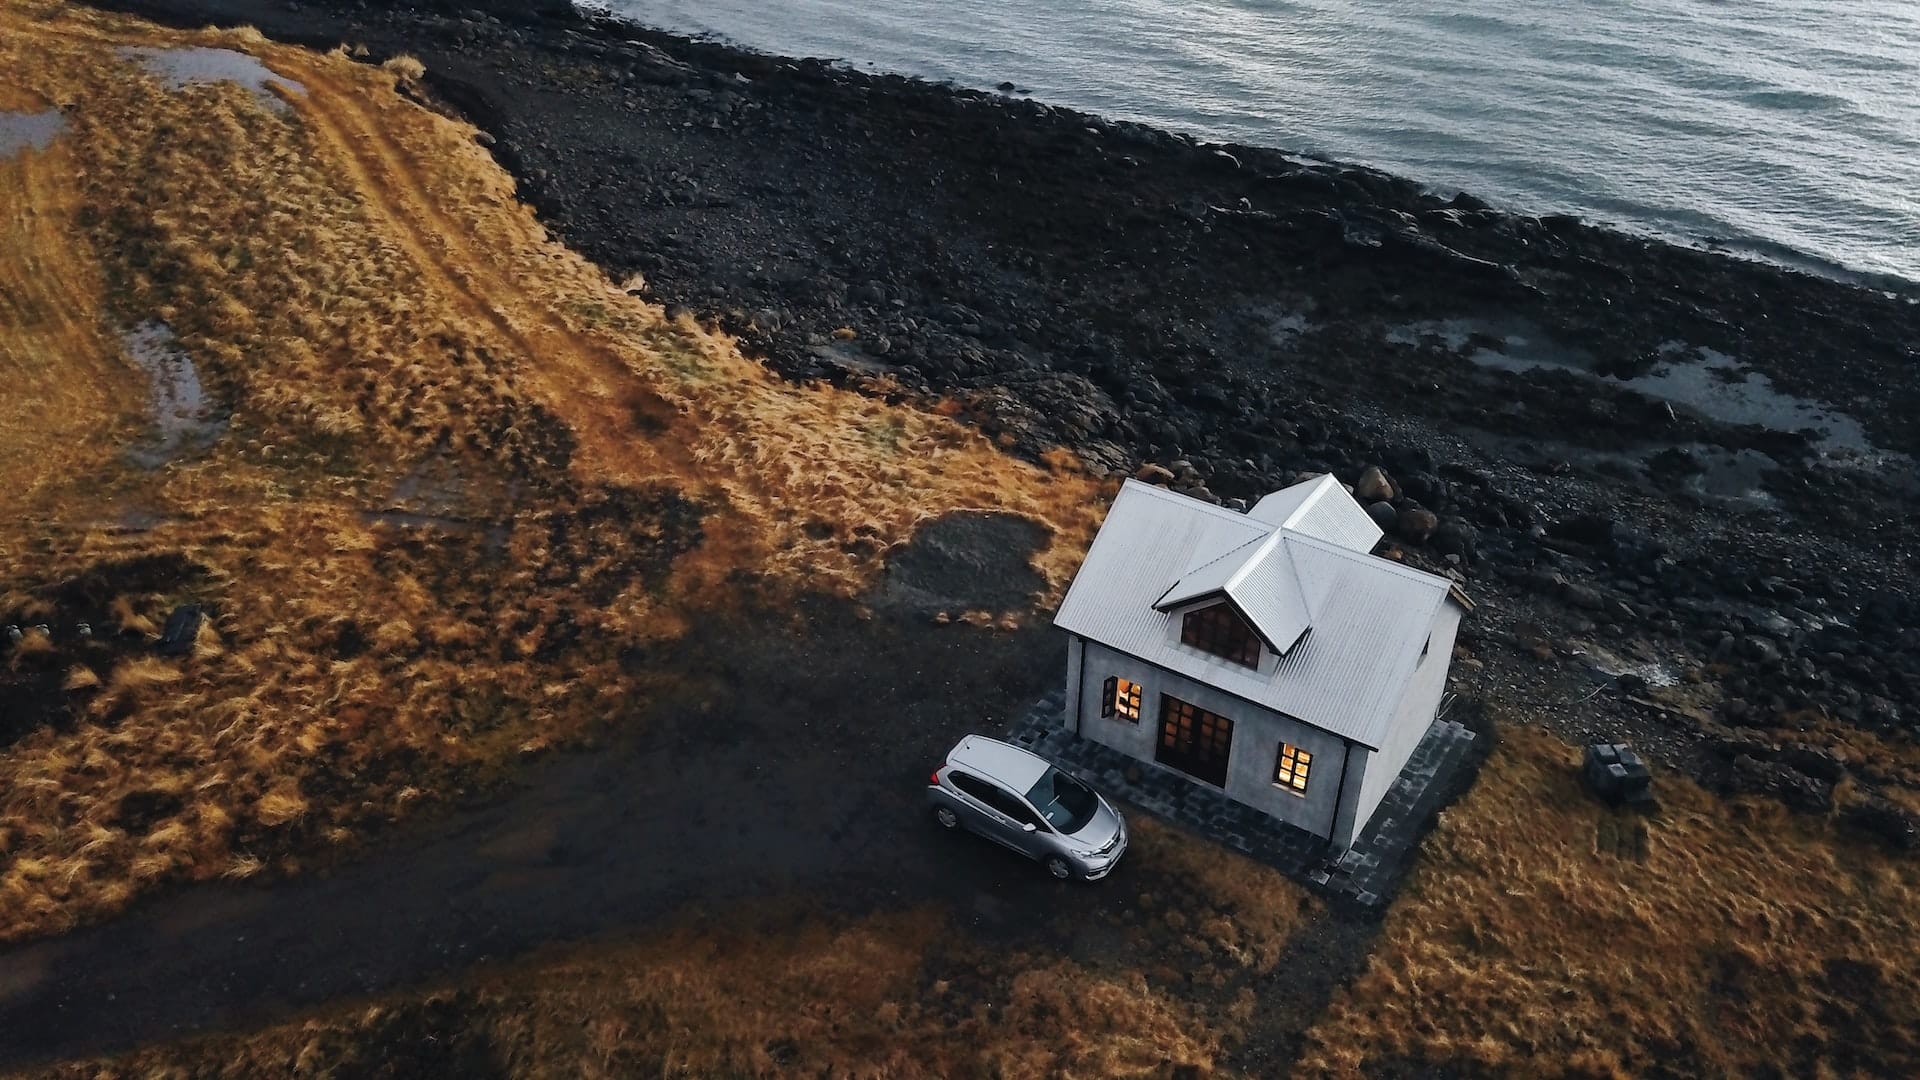 silver car parked in front of house on the ocean